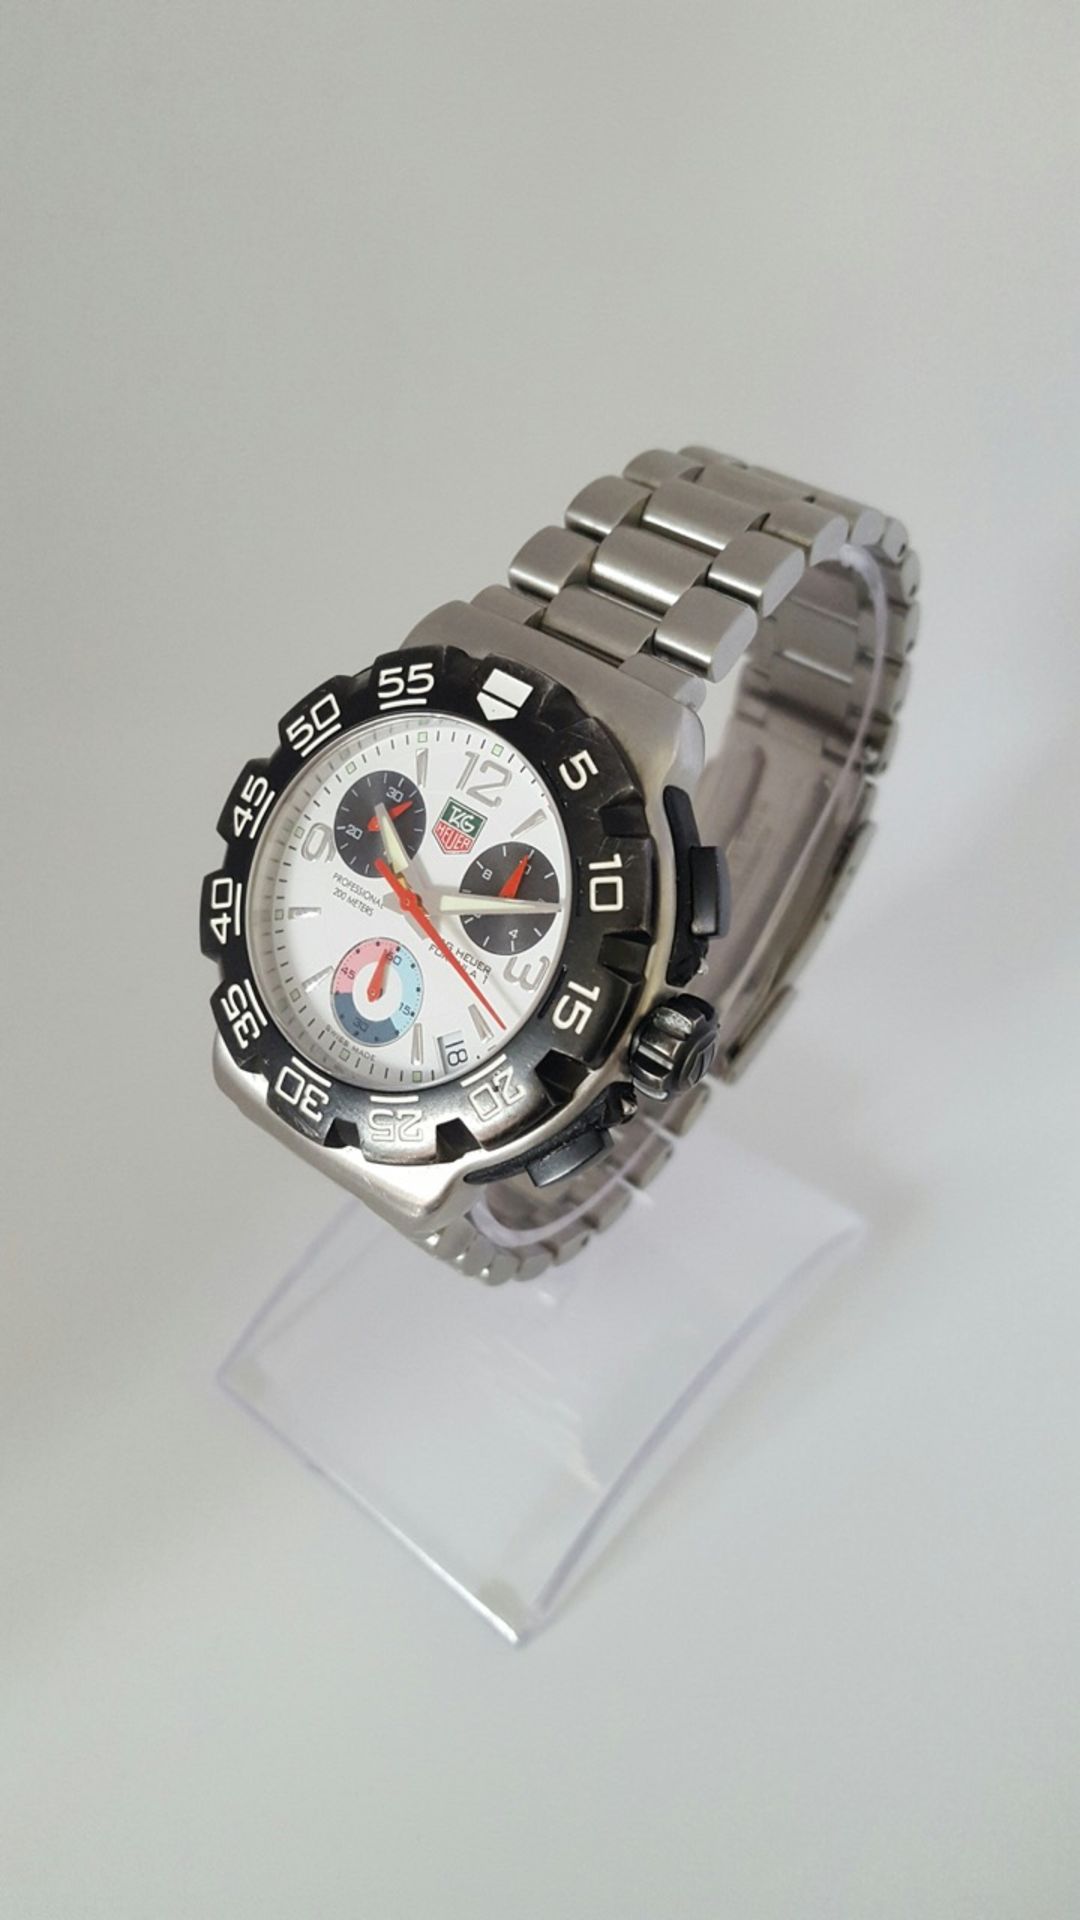 TAG HEUER F1 CAC1111-1 CHRONOGRAPH WATCH - Image 2 of 4